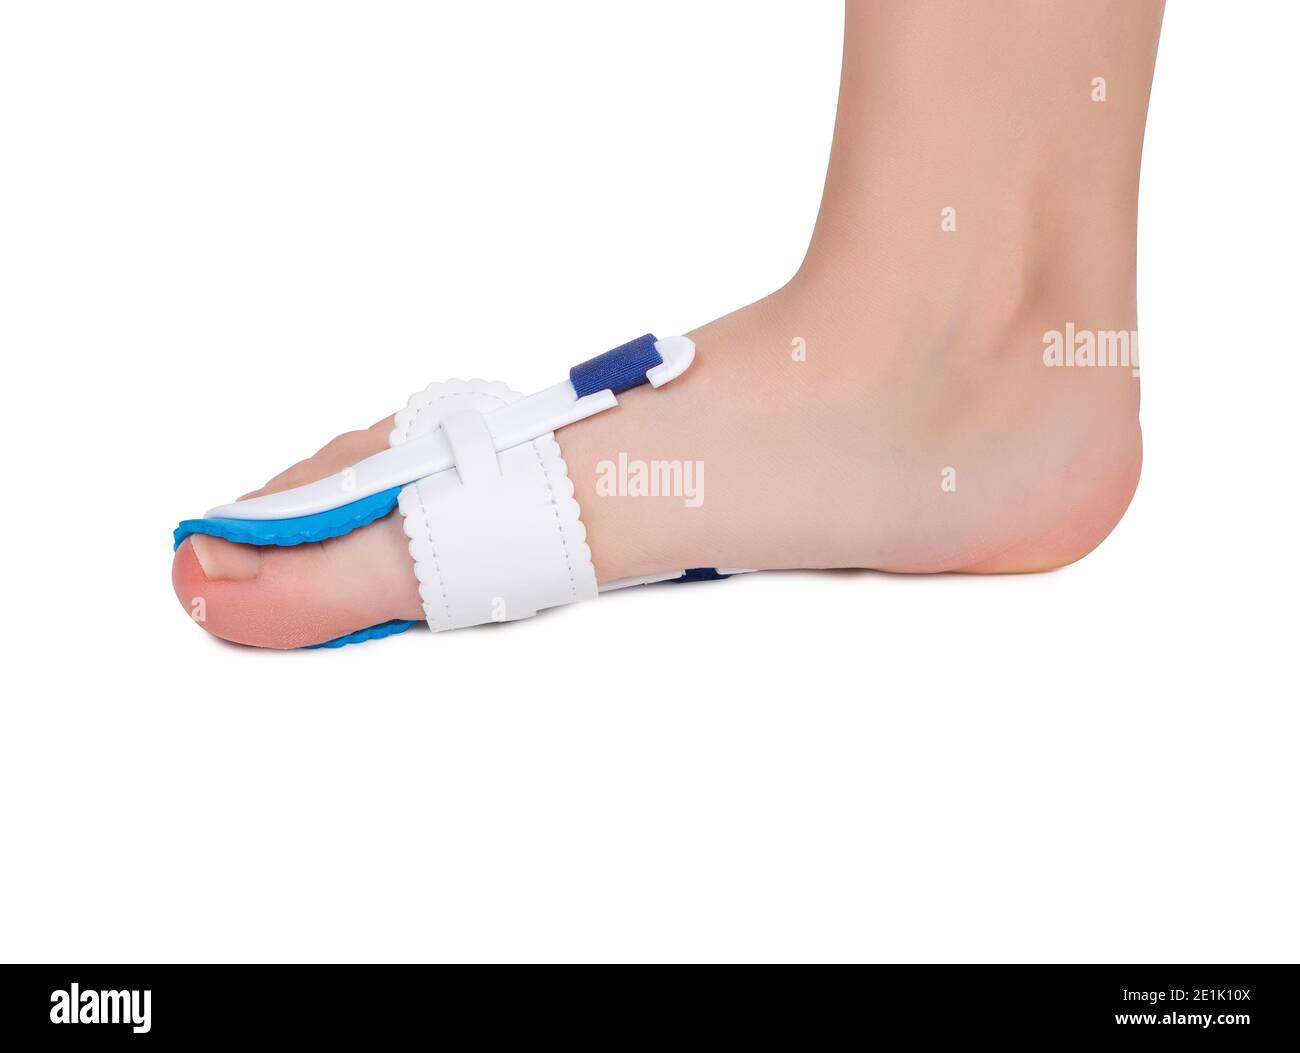 Special medical orthopedic bandage to nonsurgical treatment of a thumb deformity also known as Hallux Valgus. Stock Photo